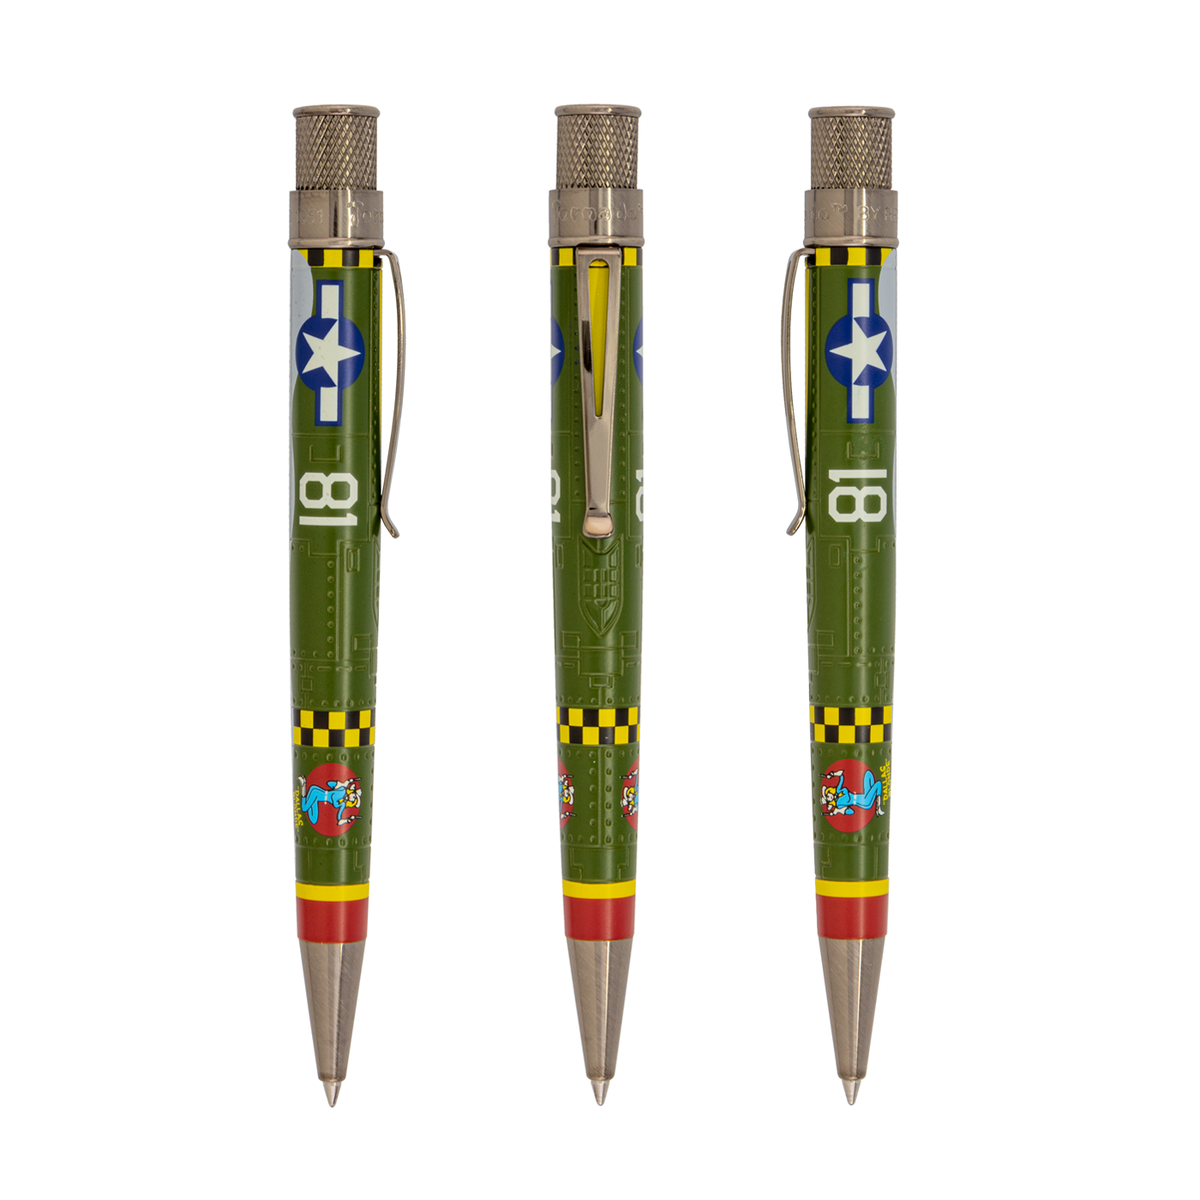 Retro 51 - The Met - Chinese Tiger Rank Badge Rollerball